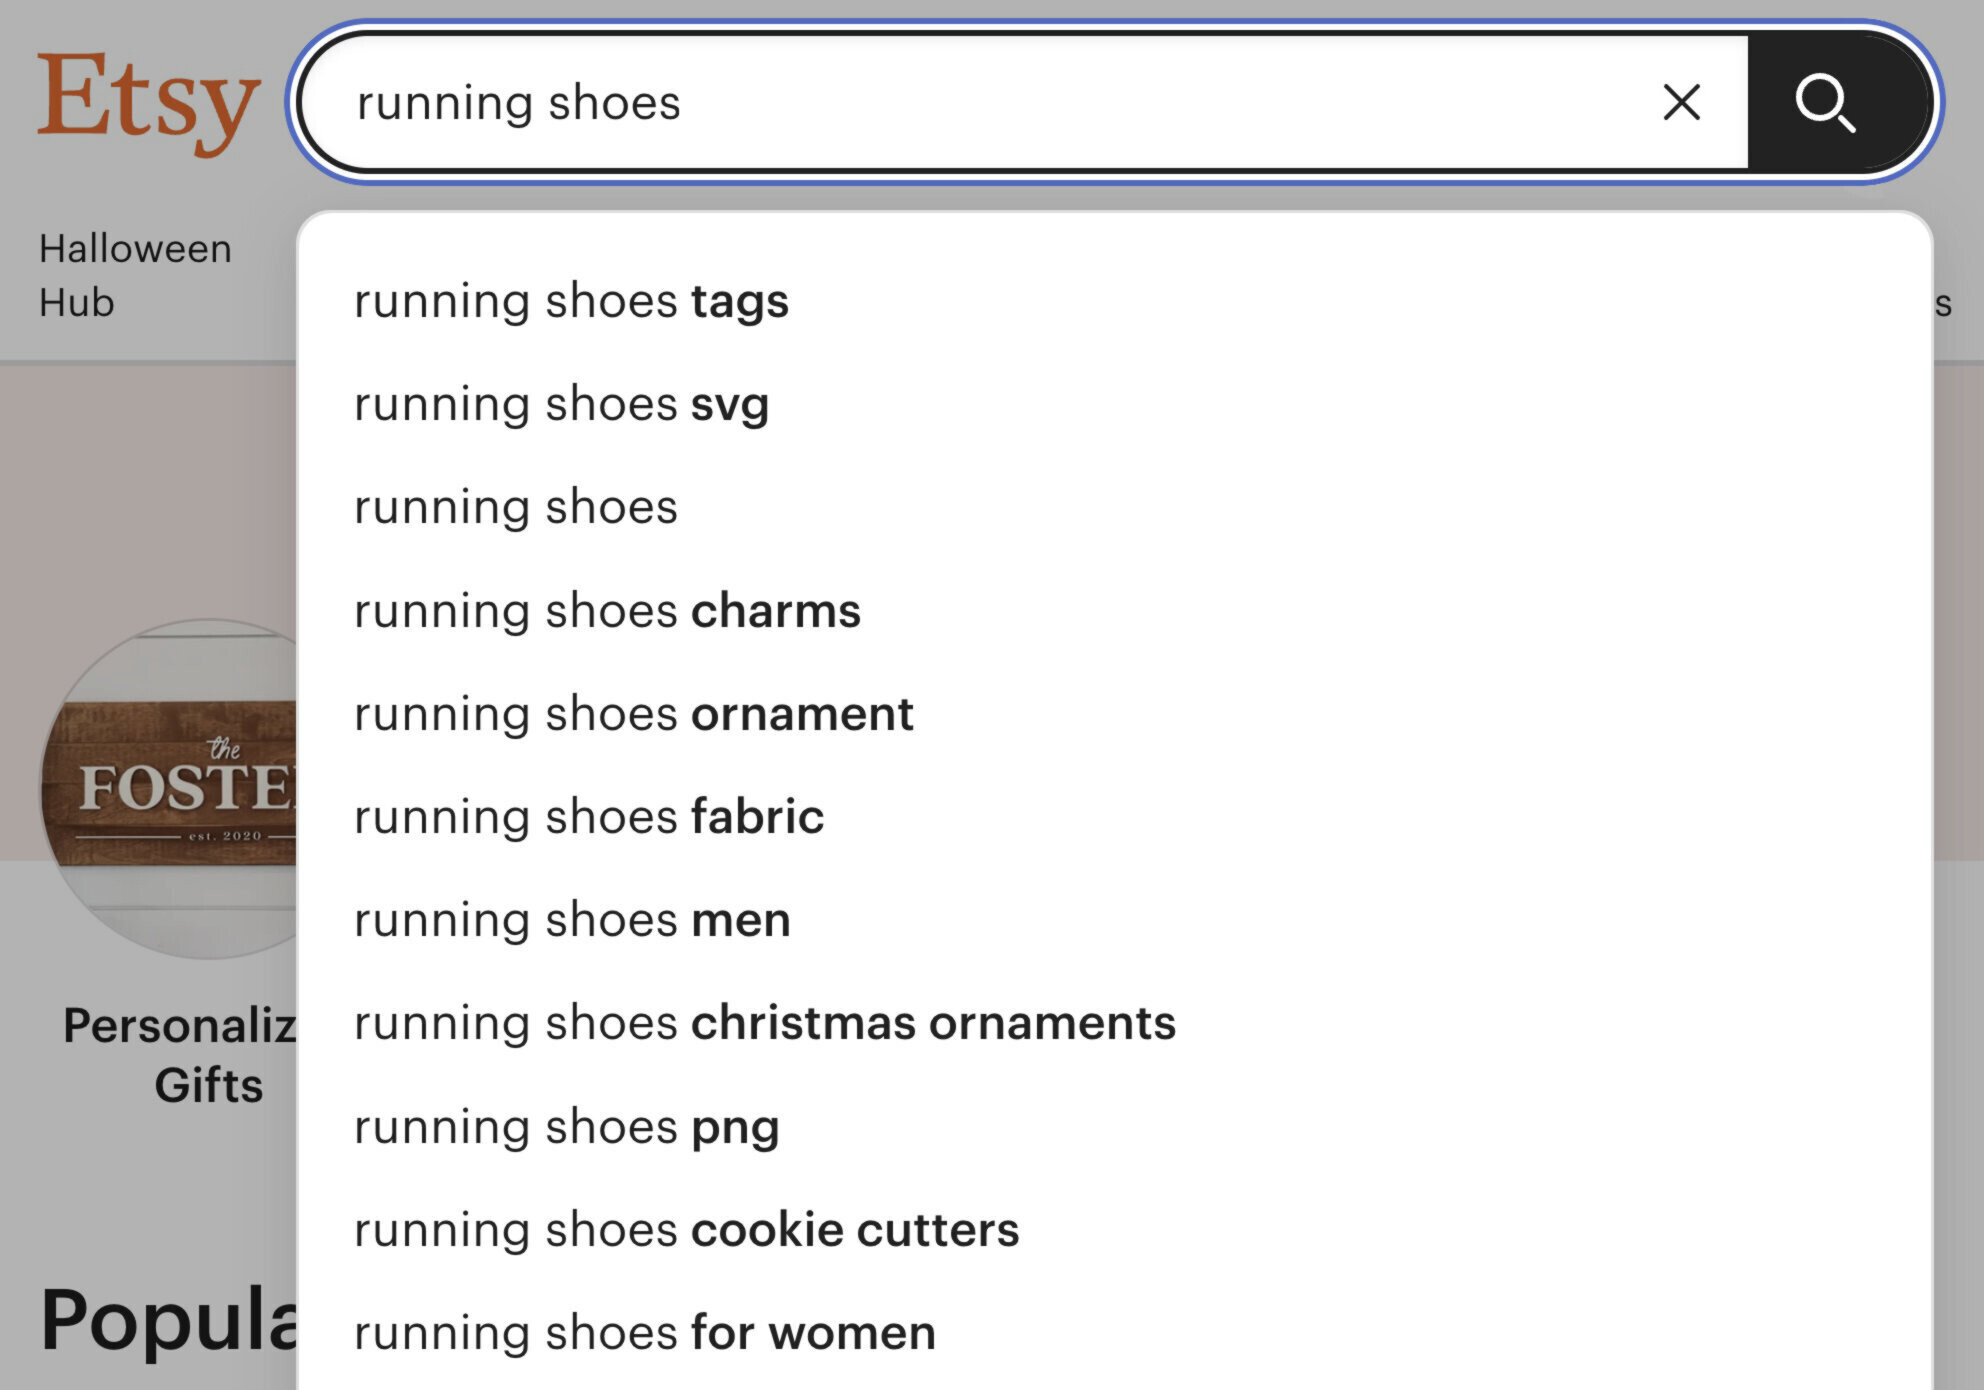 Etsy search suggestions for the keyword "running shoes"